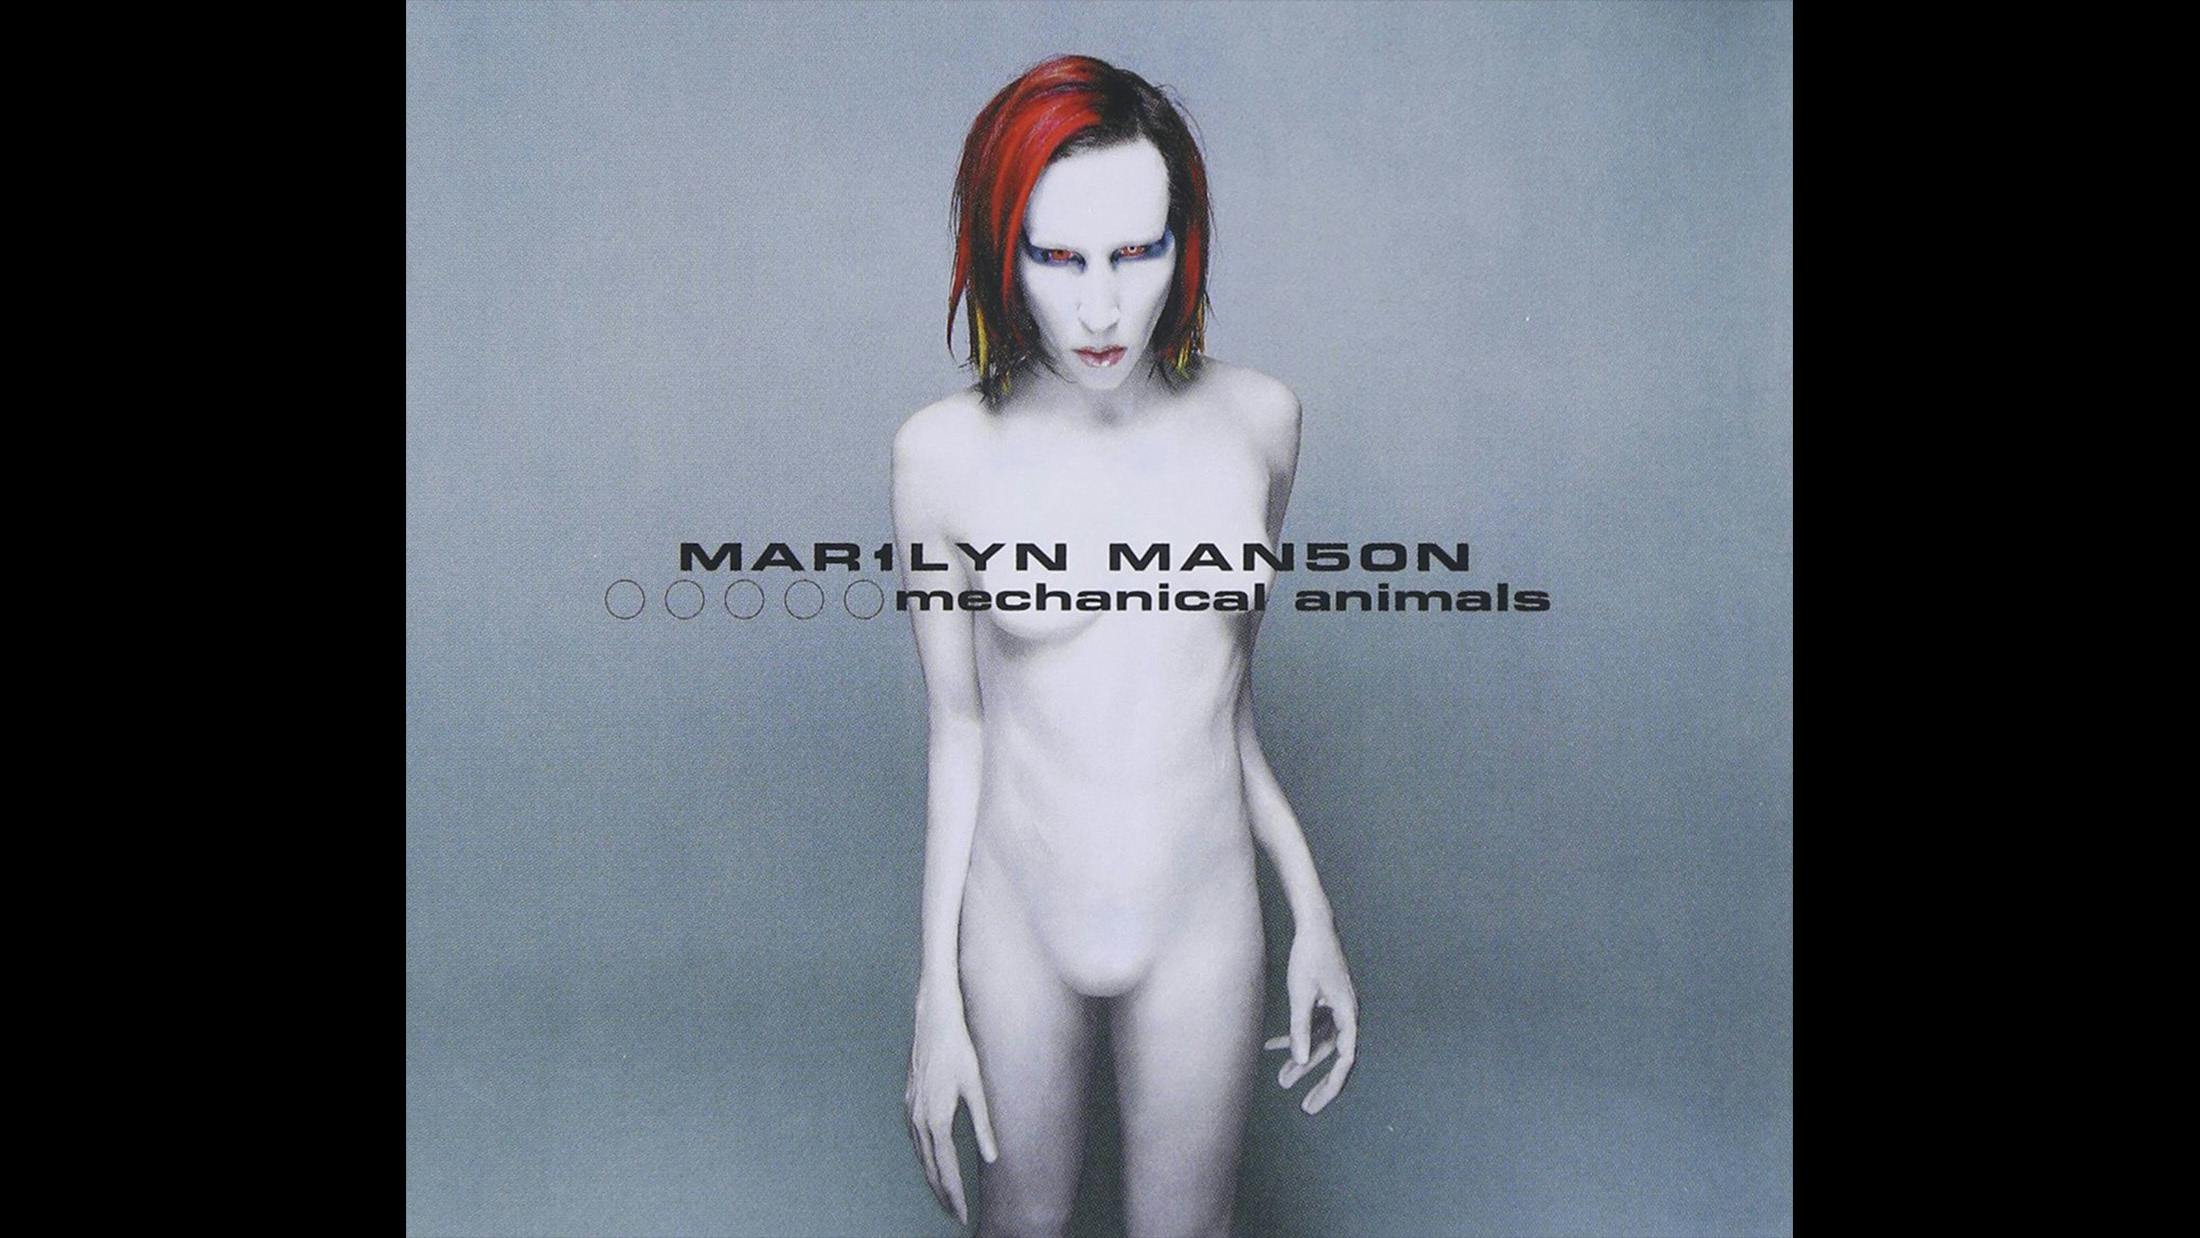 “I wrote this record when I went to Hollywood, and it was my introduction to the world of fame,” Manson explains. “But I wrote about that fame before I was famous, so it was more like an omen, or a portent of what was to come. I really like the way that this record sounds, though I hated it at the time, and [producer] Michael Beinhorn was a bit of a prick.”